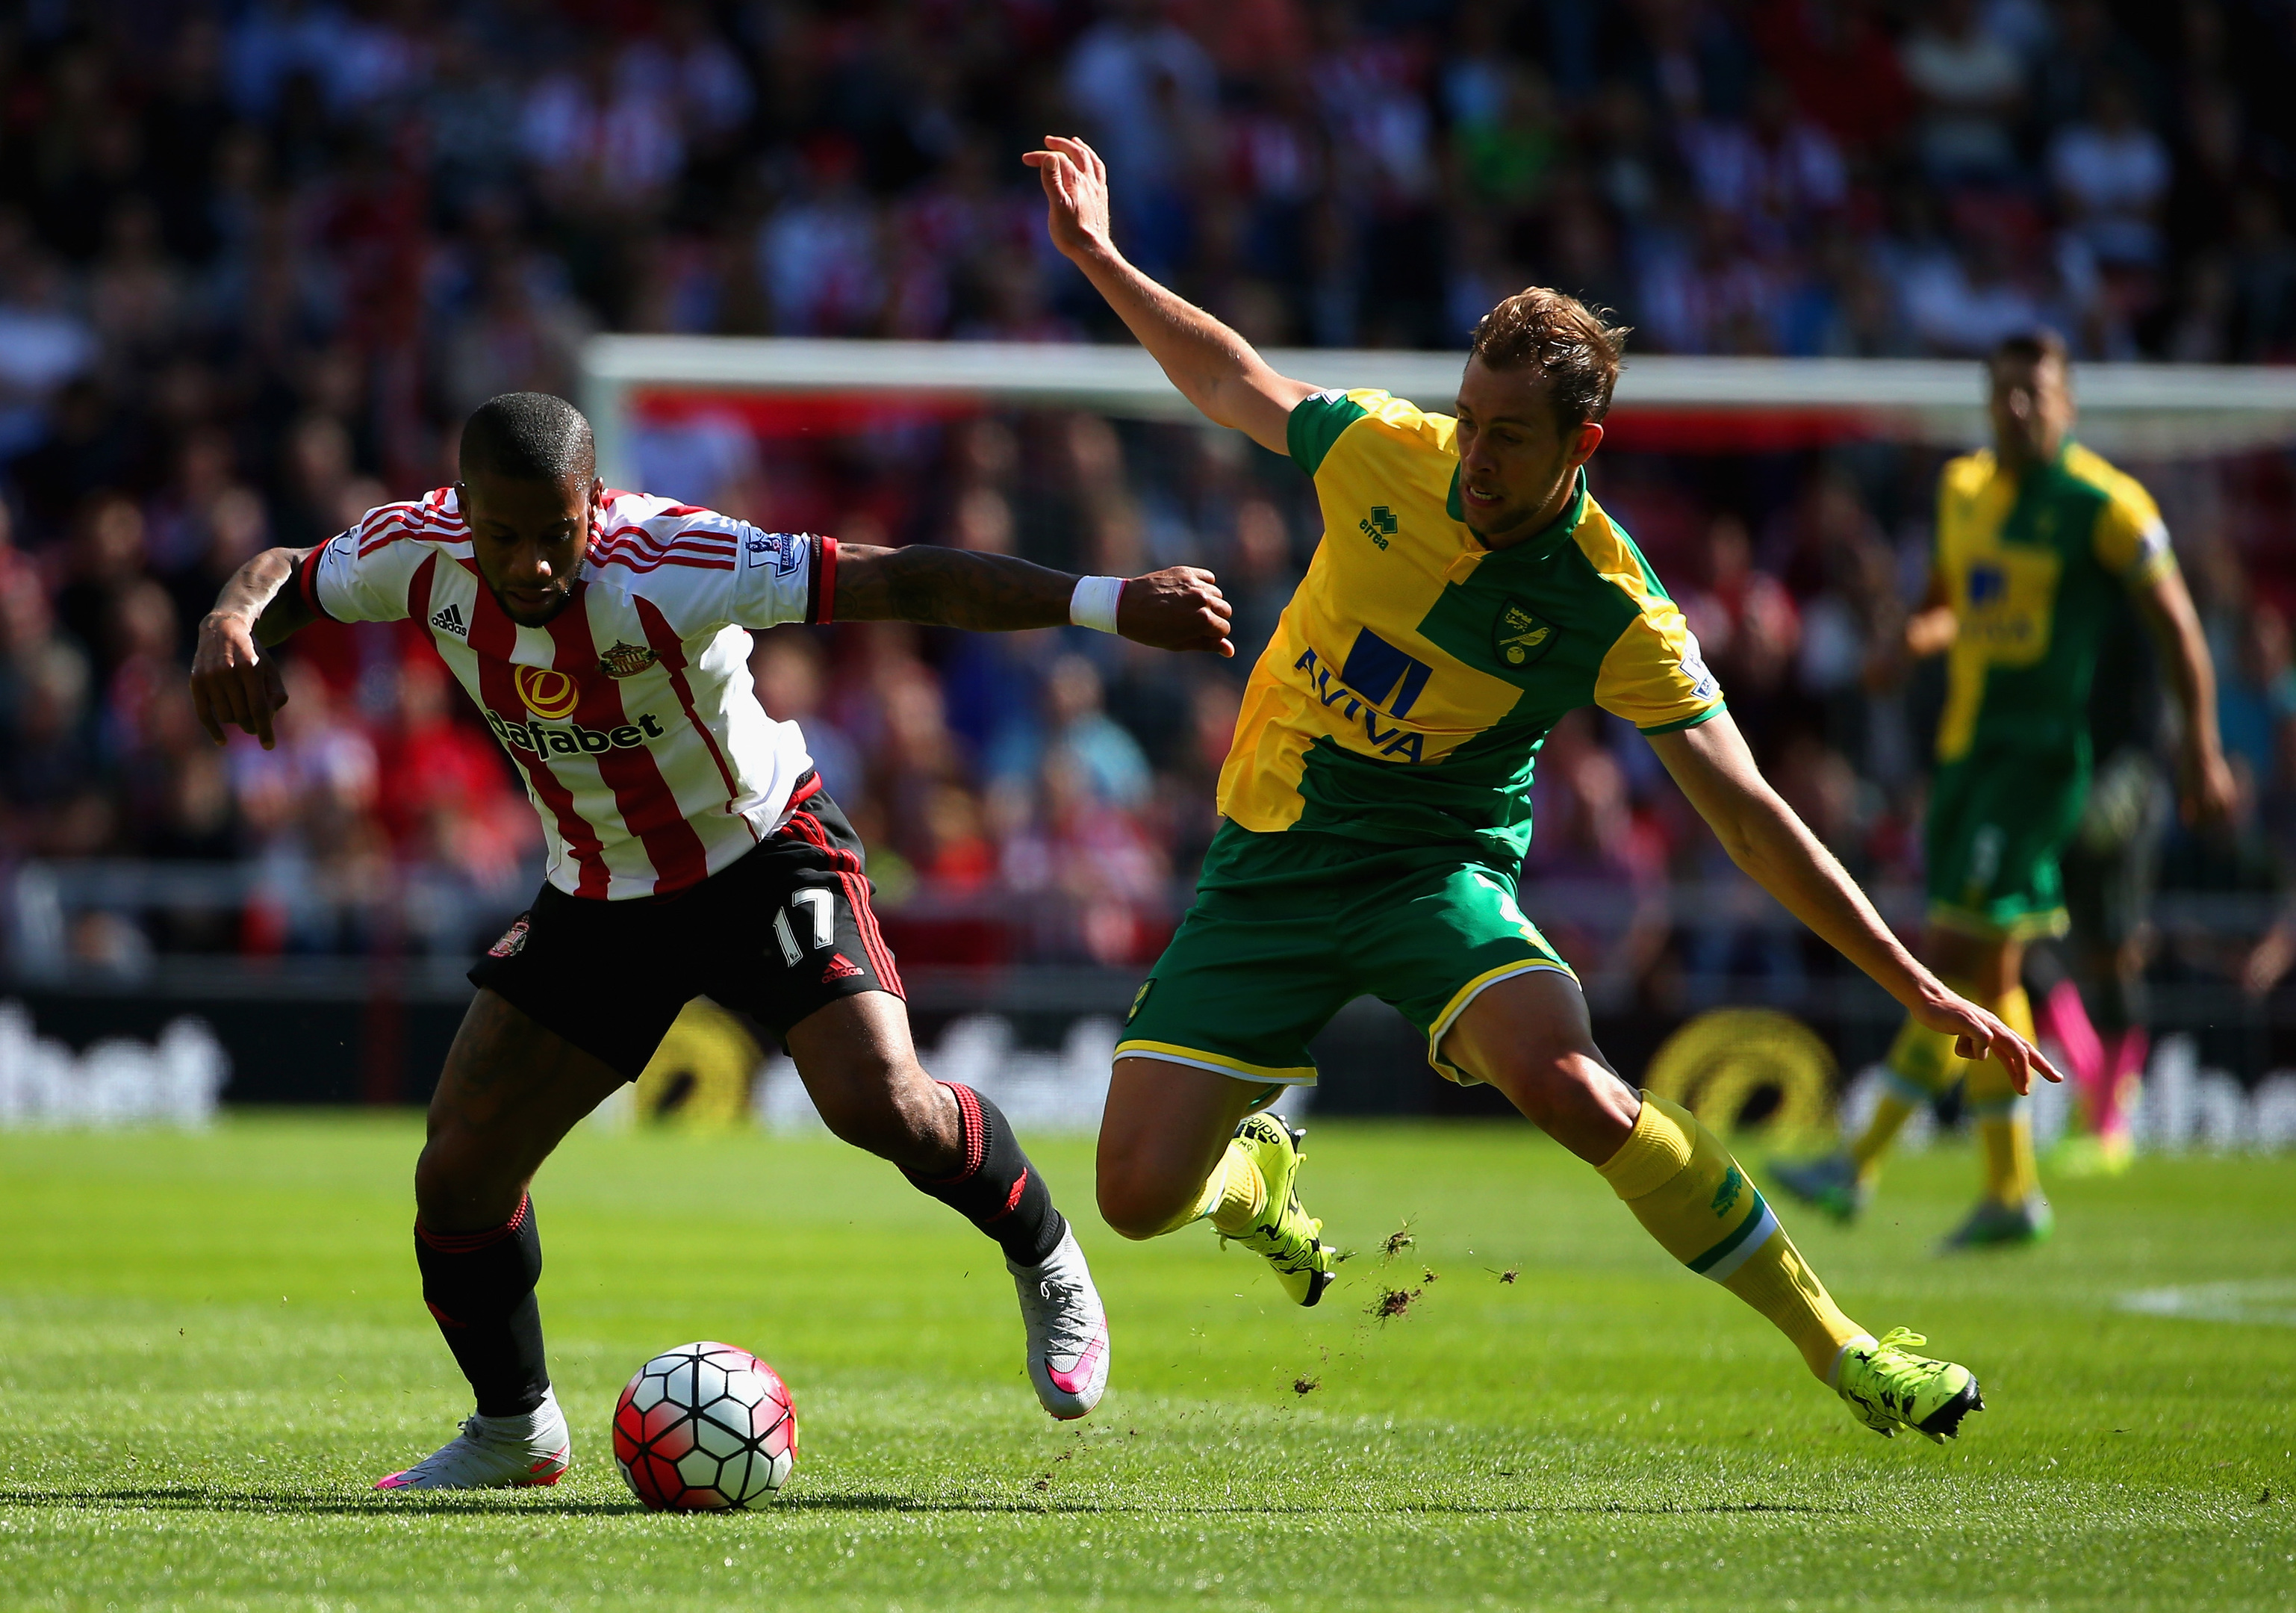 Steven Whittaker (R) in action for Norwich City (Chris Brunskill/Getty Images)